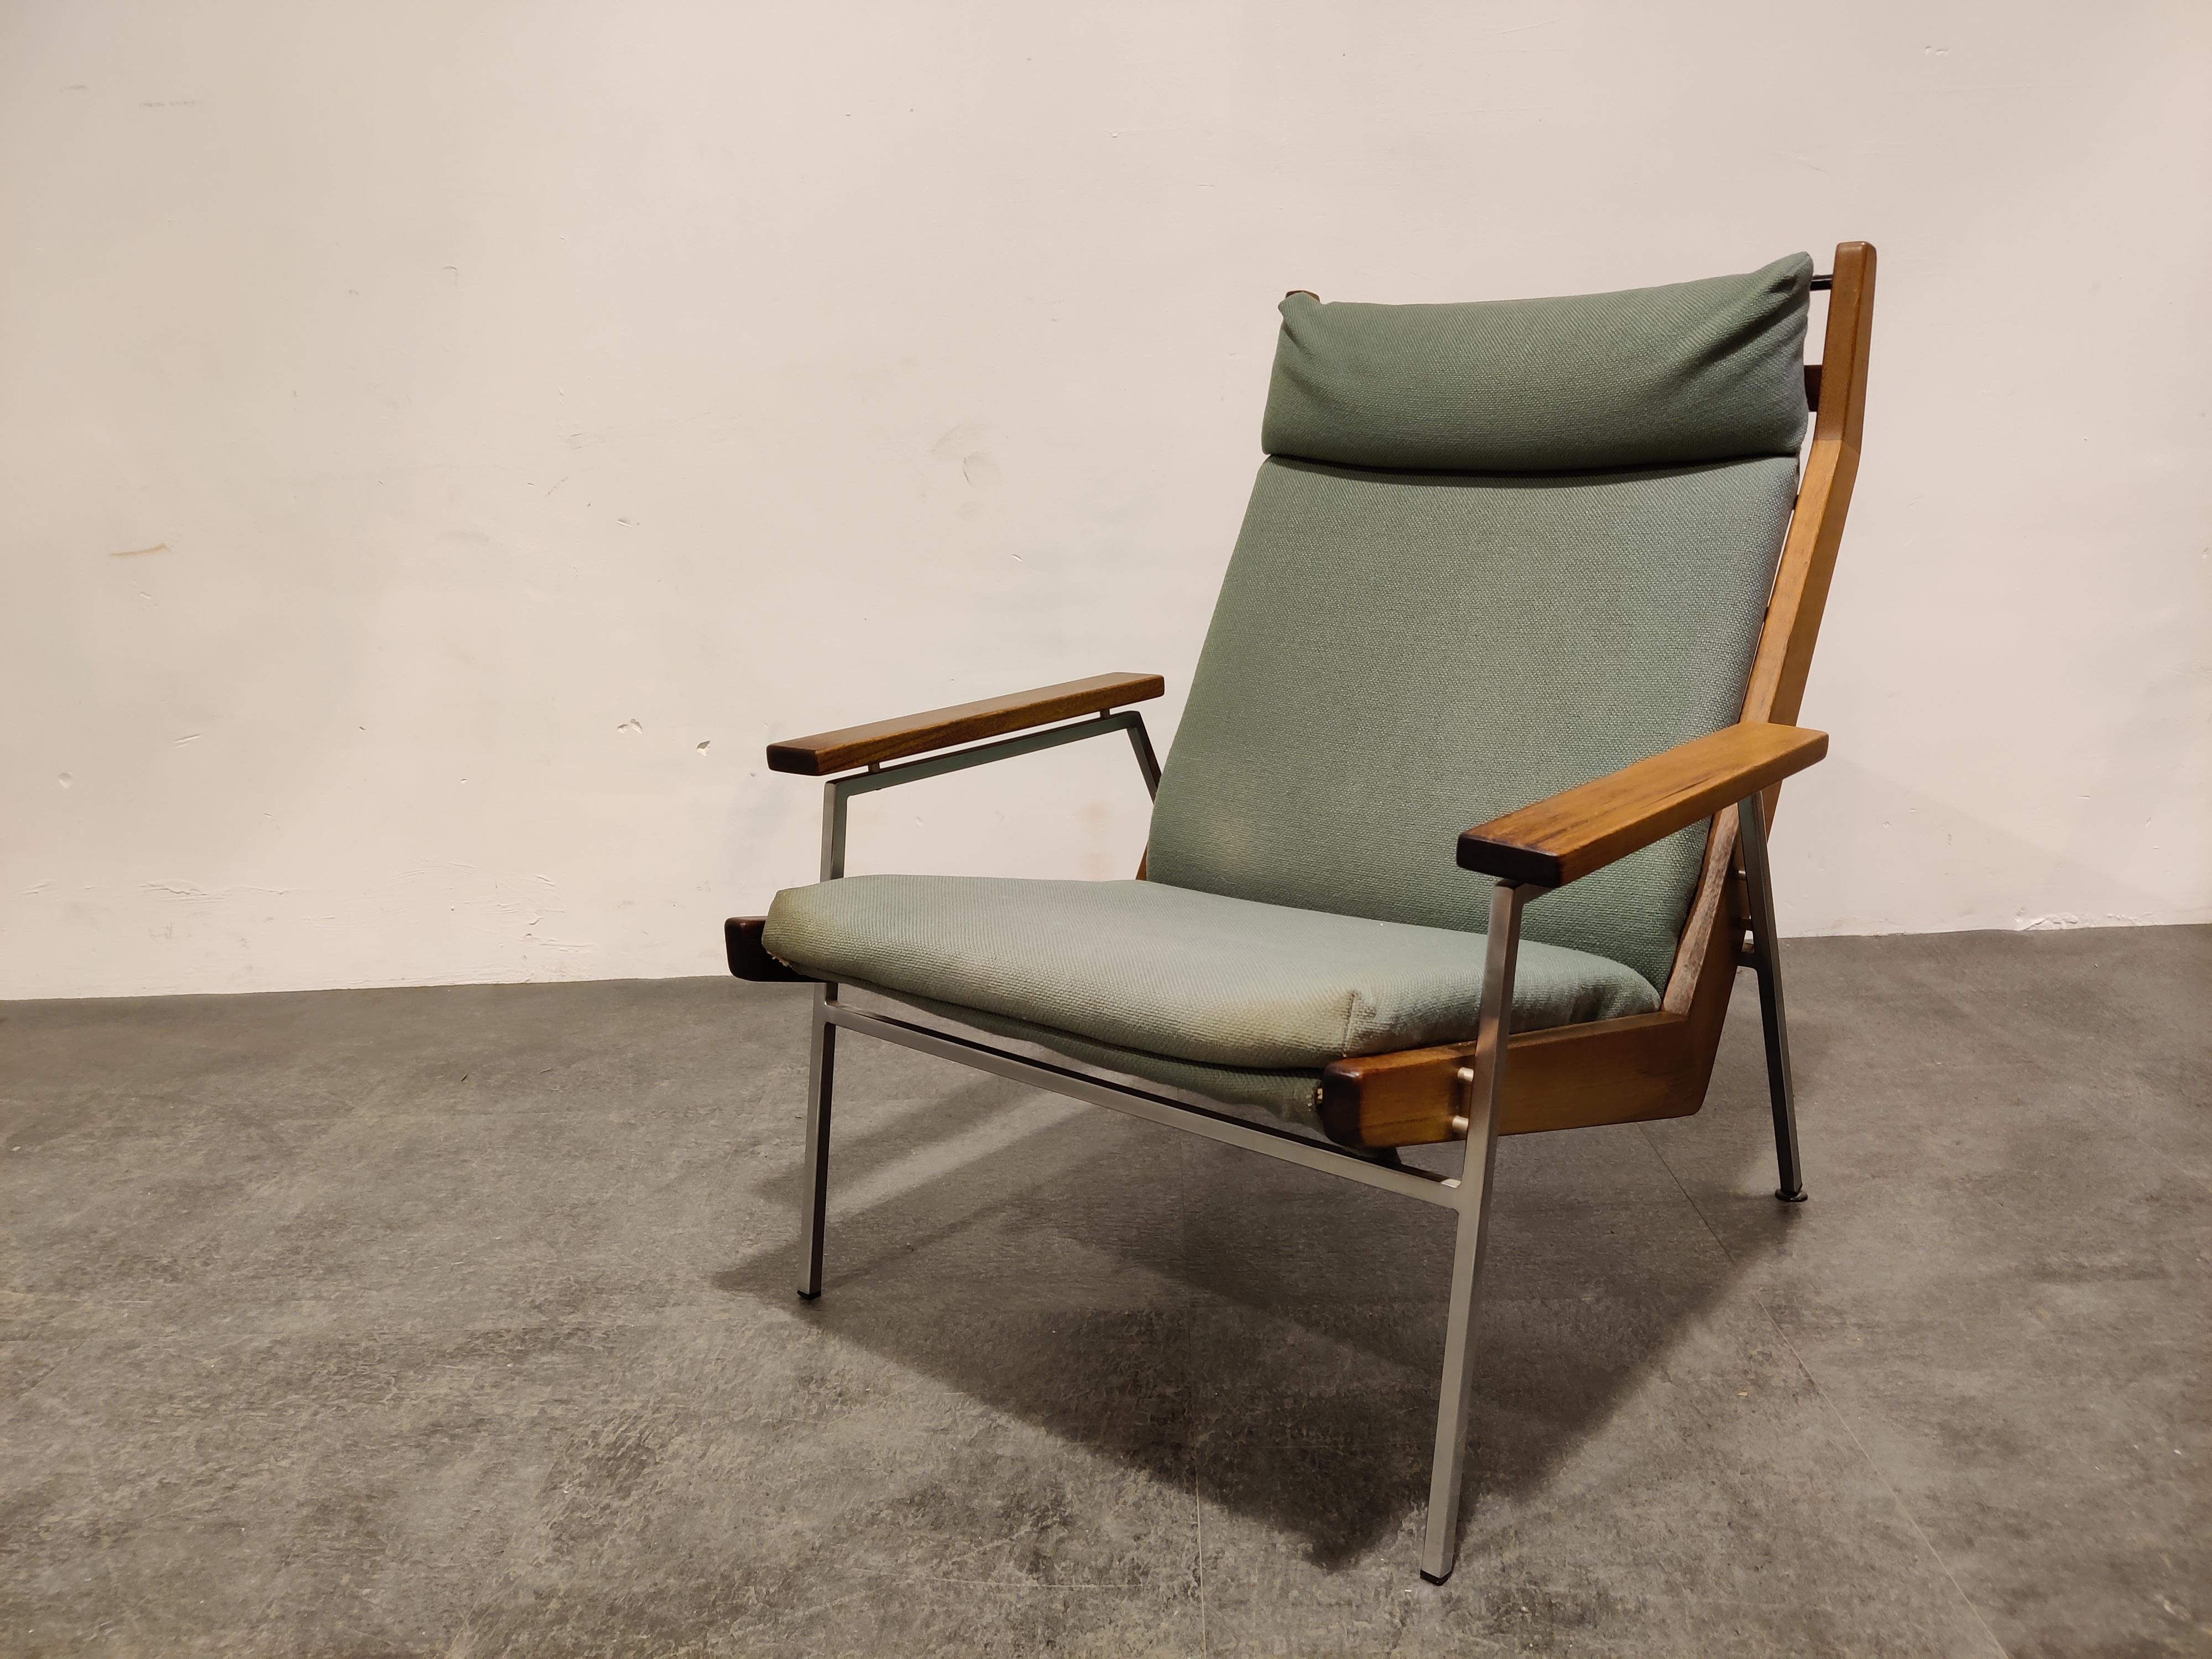 Metal Lotus Chair by Rob Parry for De Ster Gelderland, 1960s